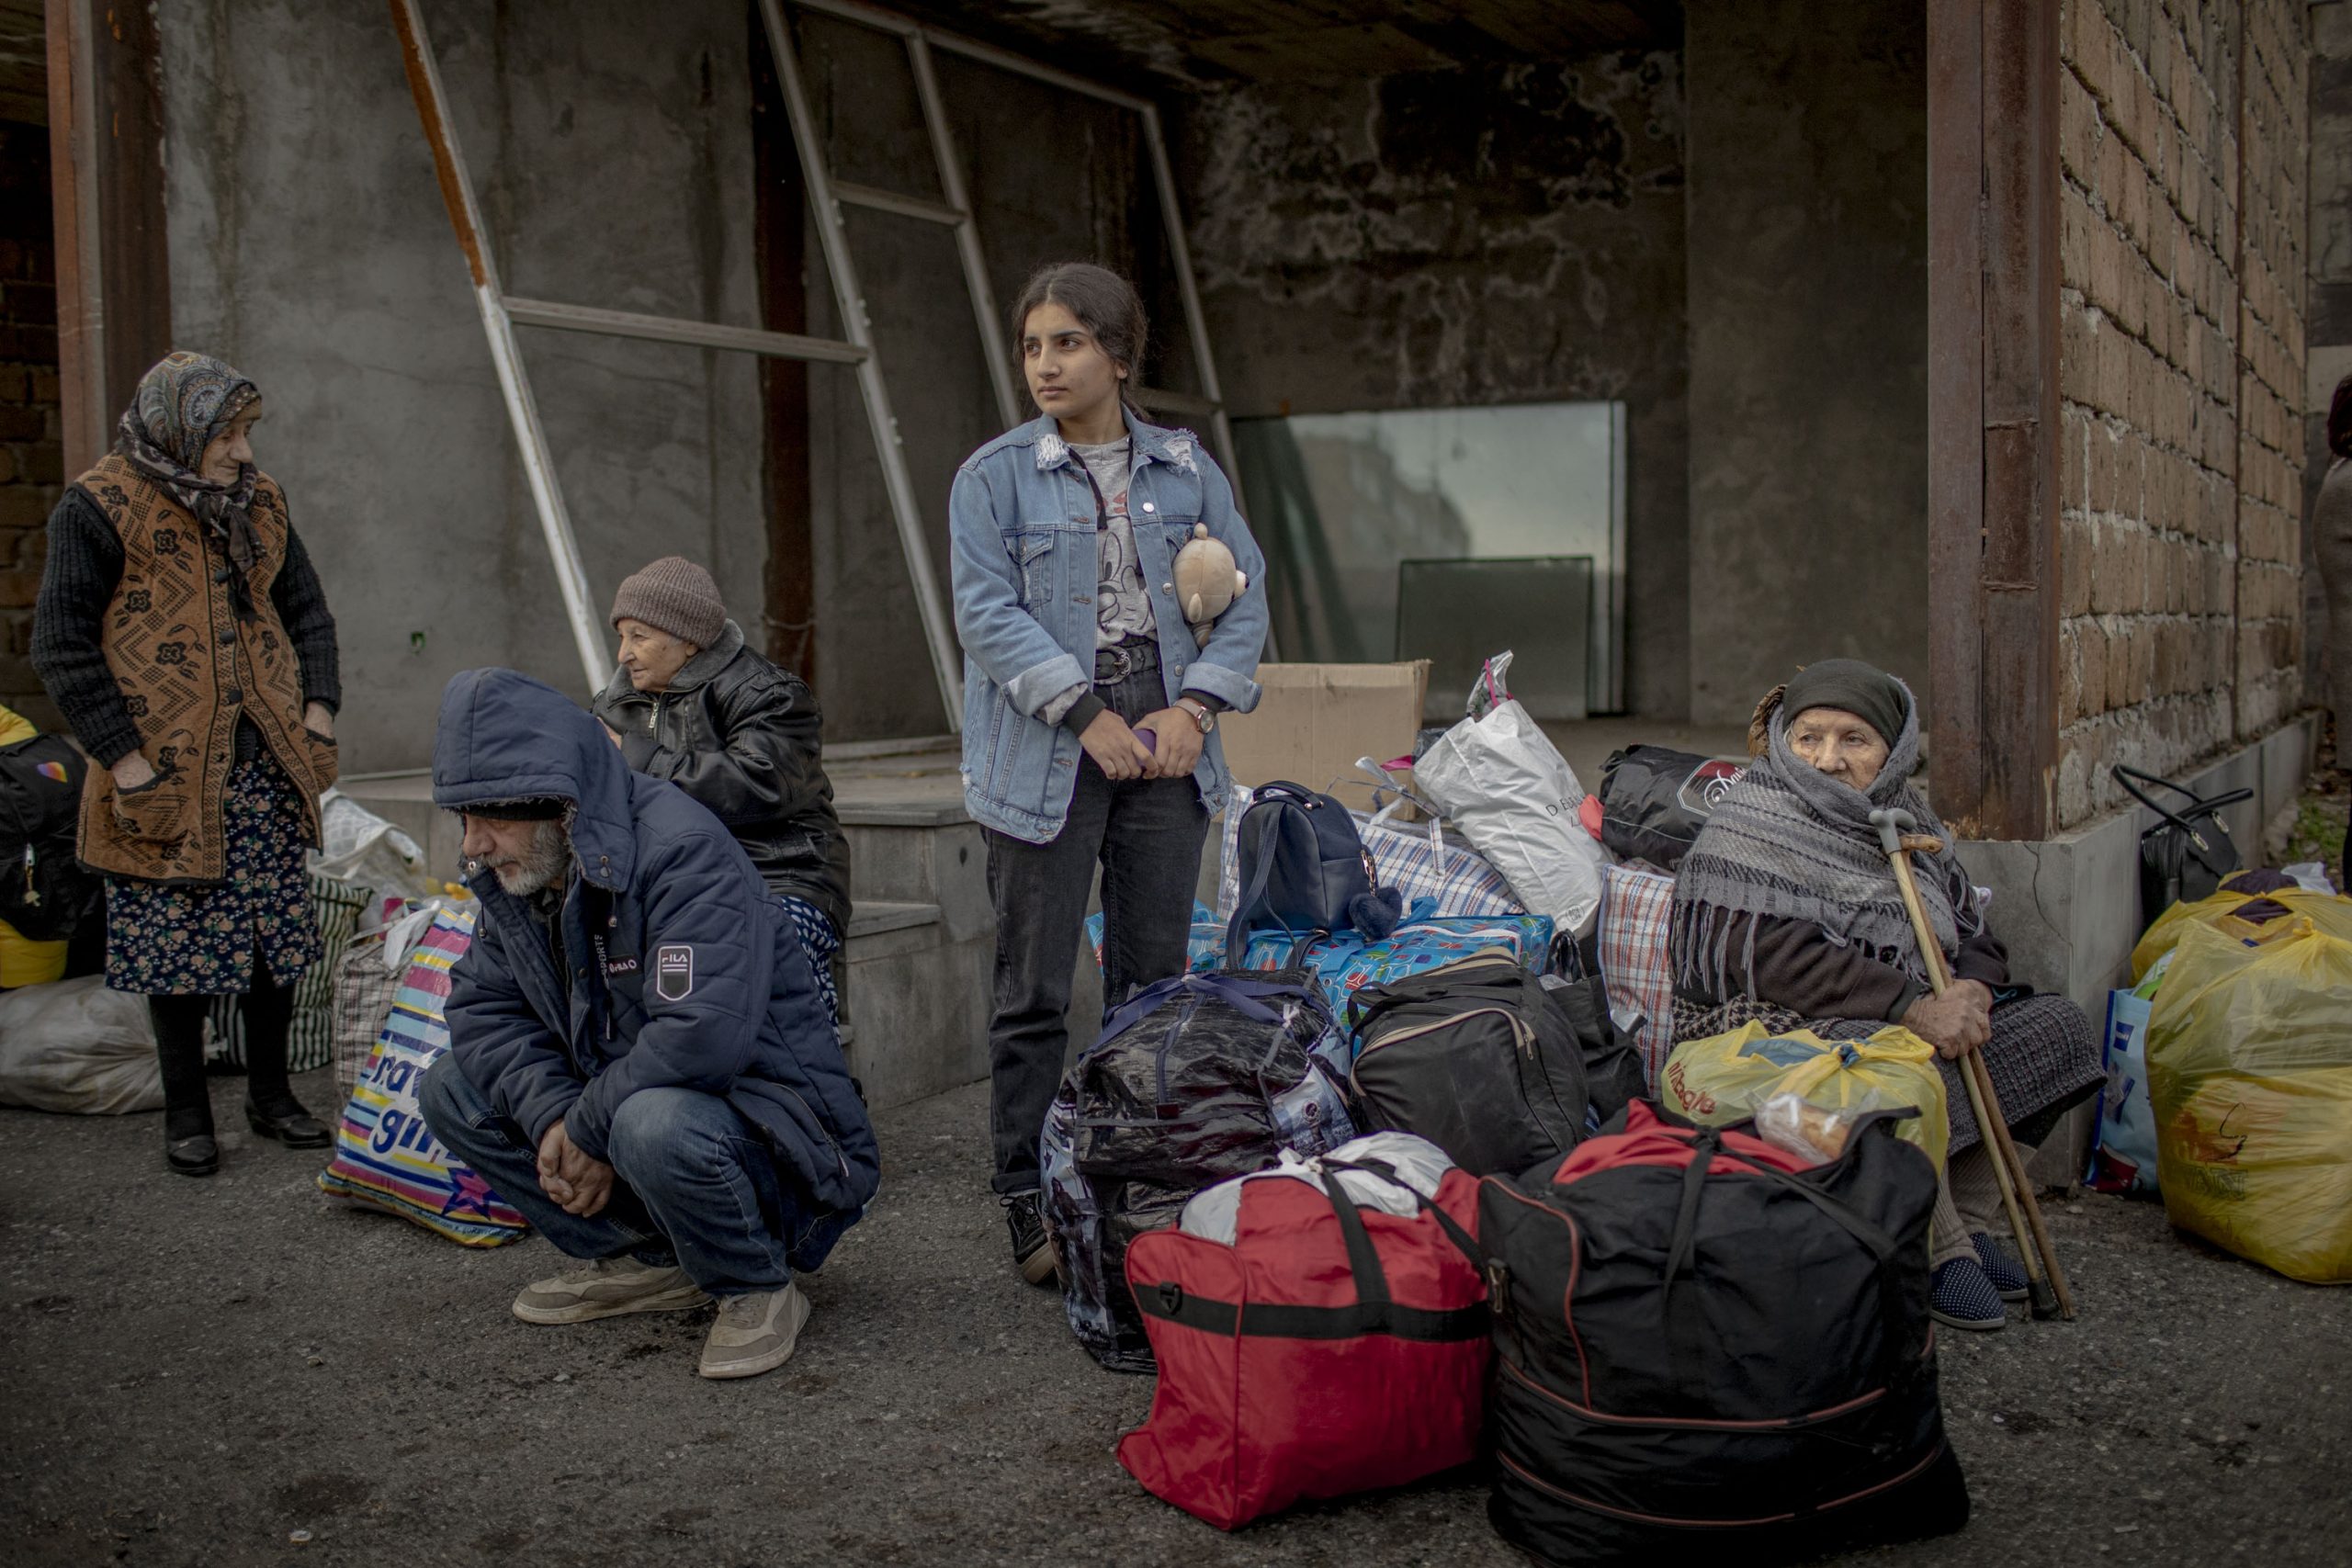 Families from Nagorno-Karabakh wait for busses to Stepanakert, in Yerevan, Armenia, on November 19, 2020. These families found refuge in Armenia during the days of the war and are now returning to their home towns and villages in Nagorno-Karabakh.